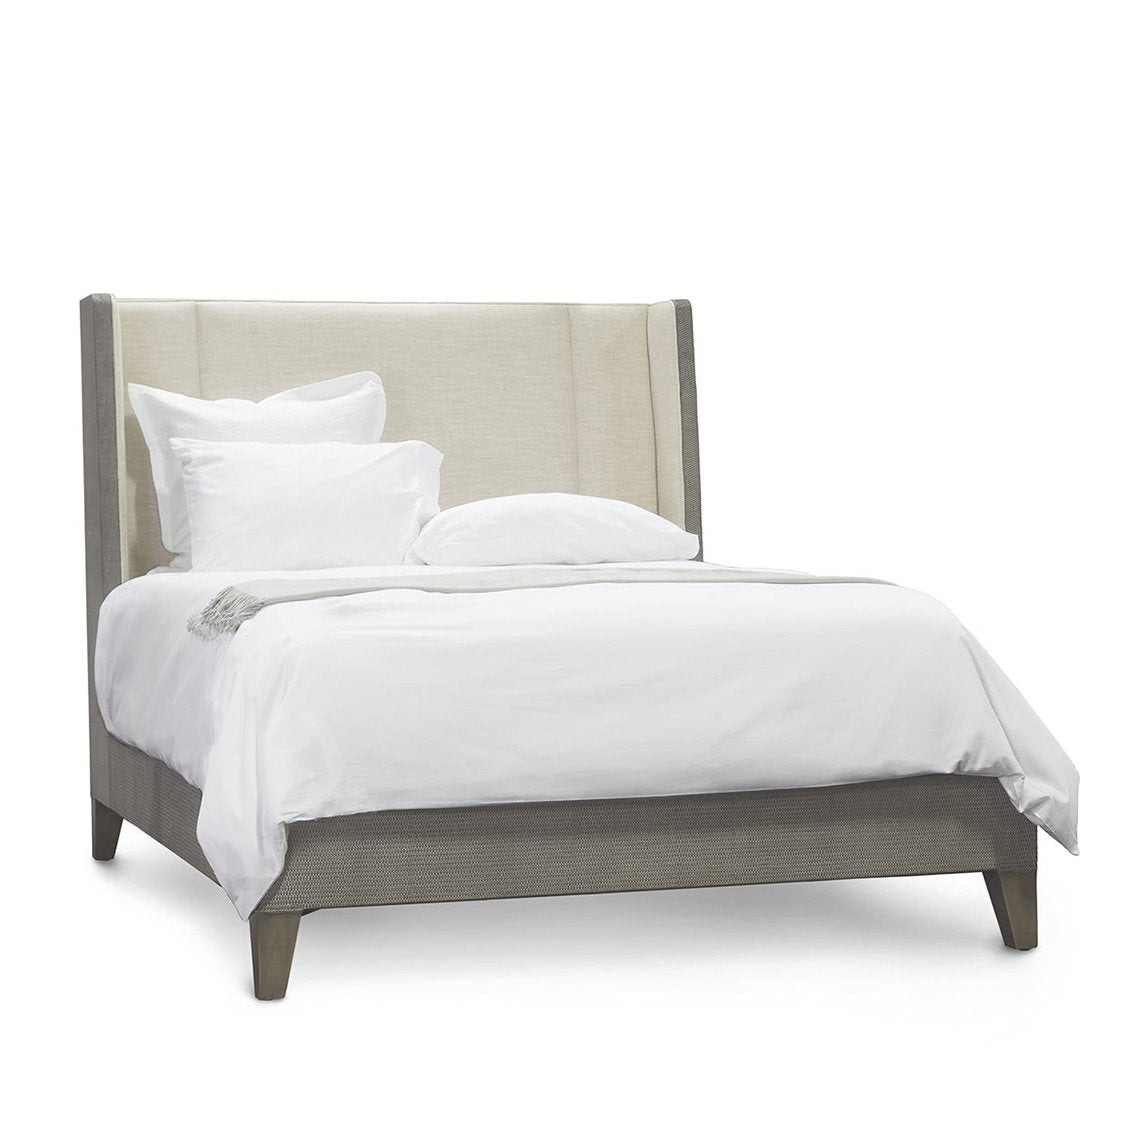 Gentry Bed, King